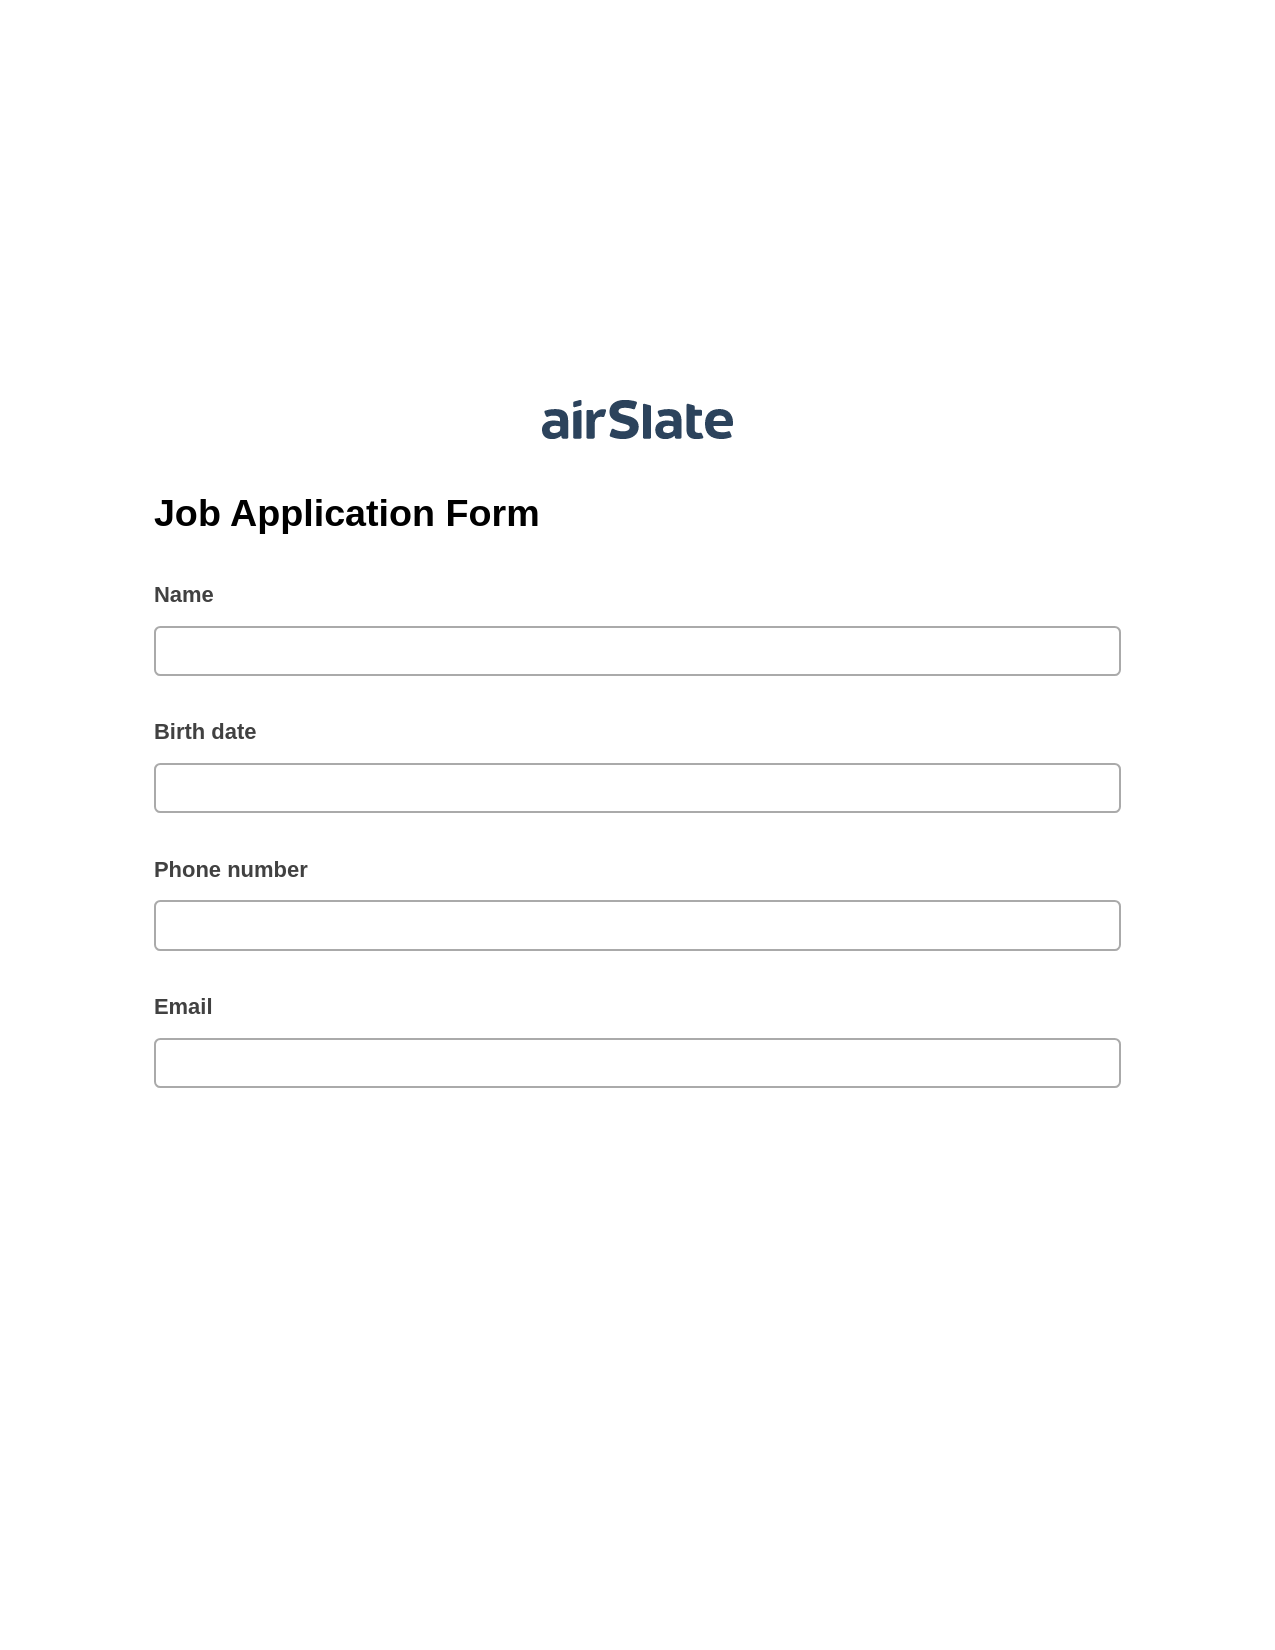 Multirole Job Application Form Pre-fill from another Slate Bot, Remove Slate Bot, OneDrive Bot